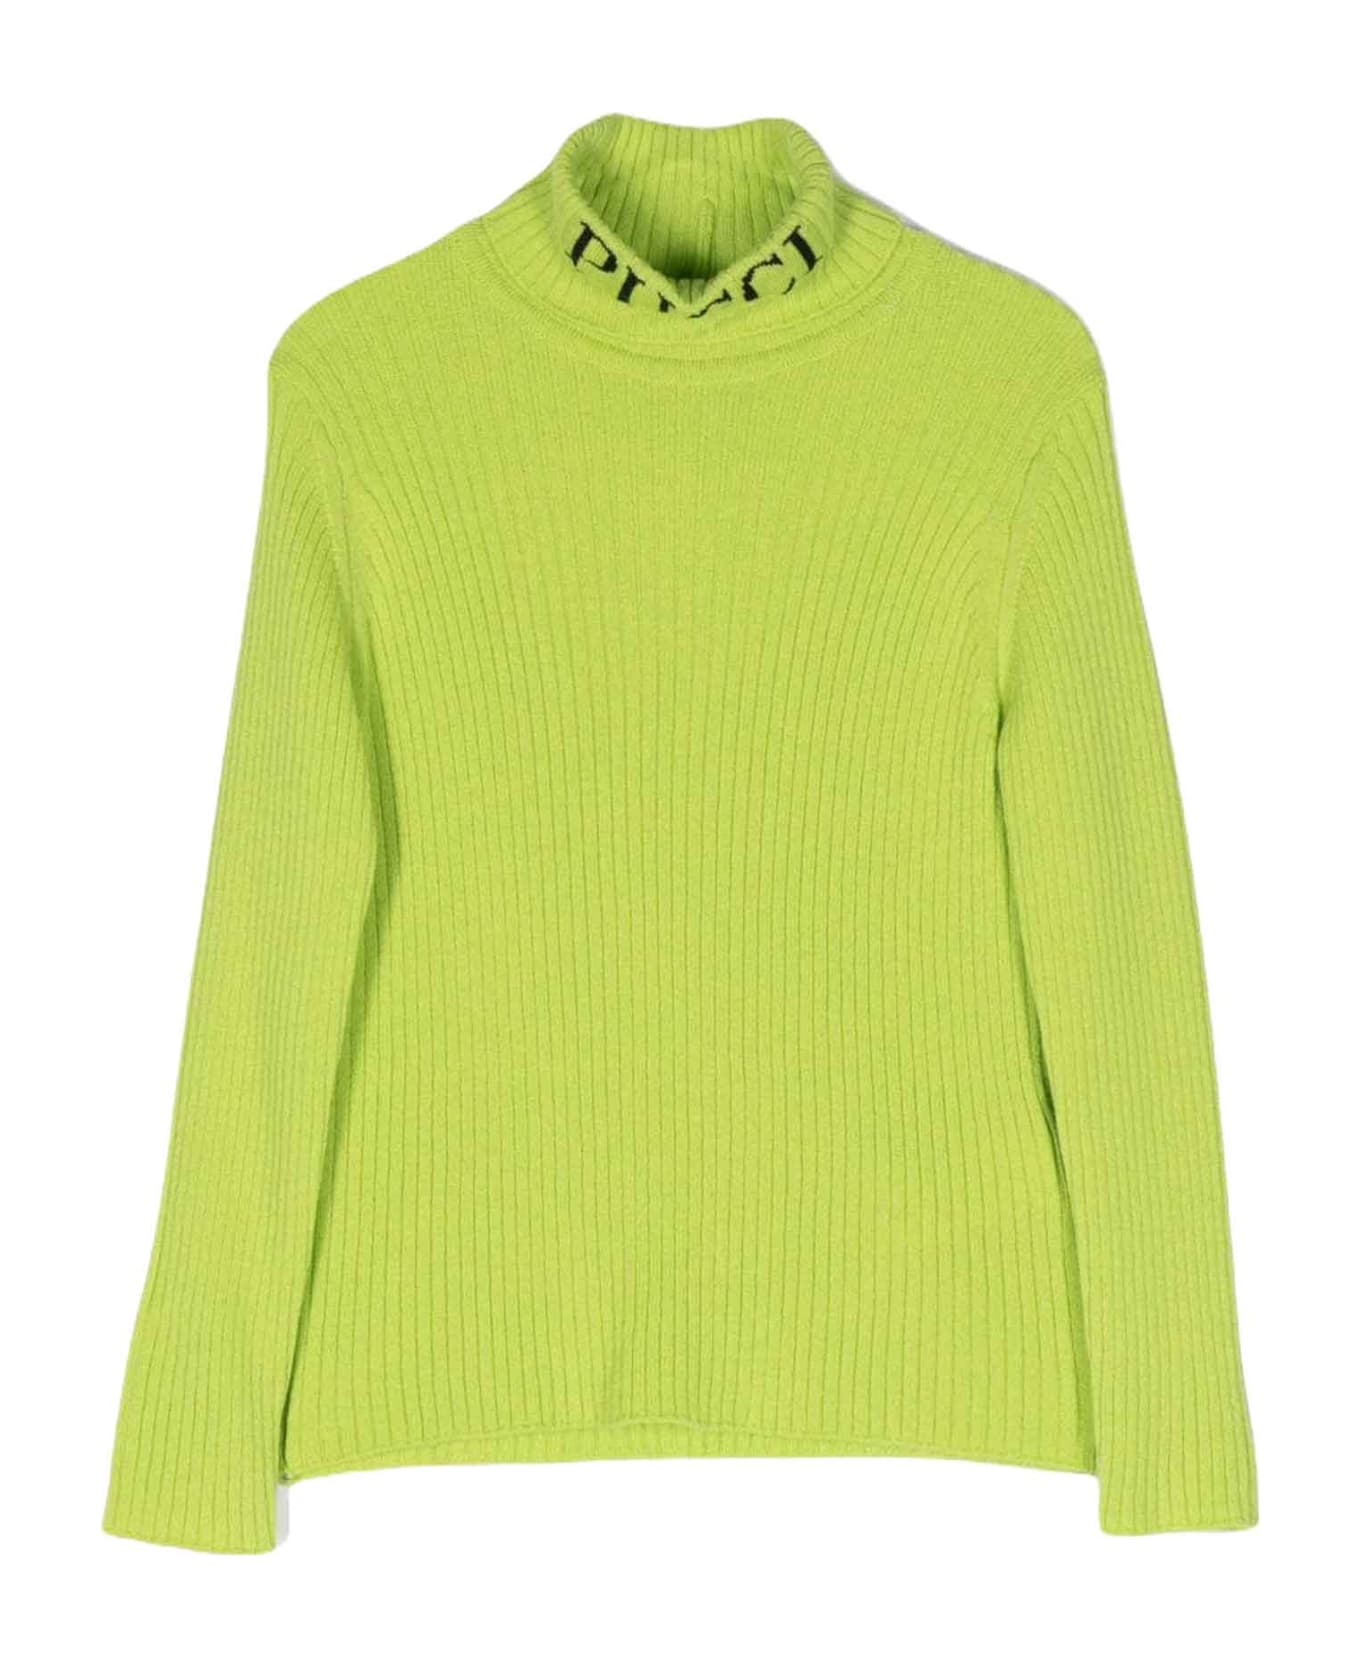 Pucci Lime Sweater Girl - Lime